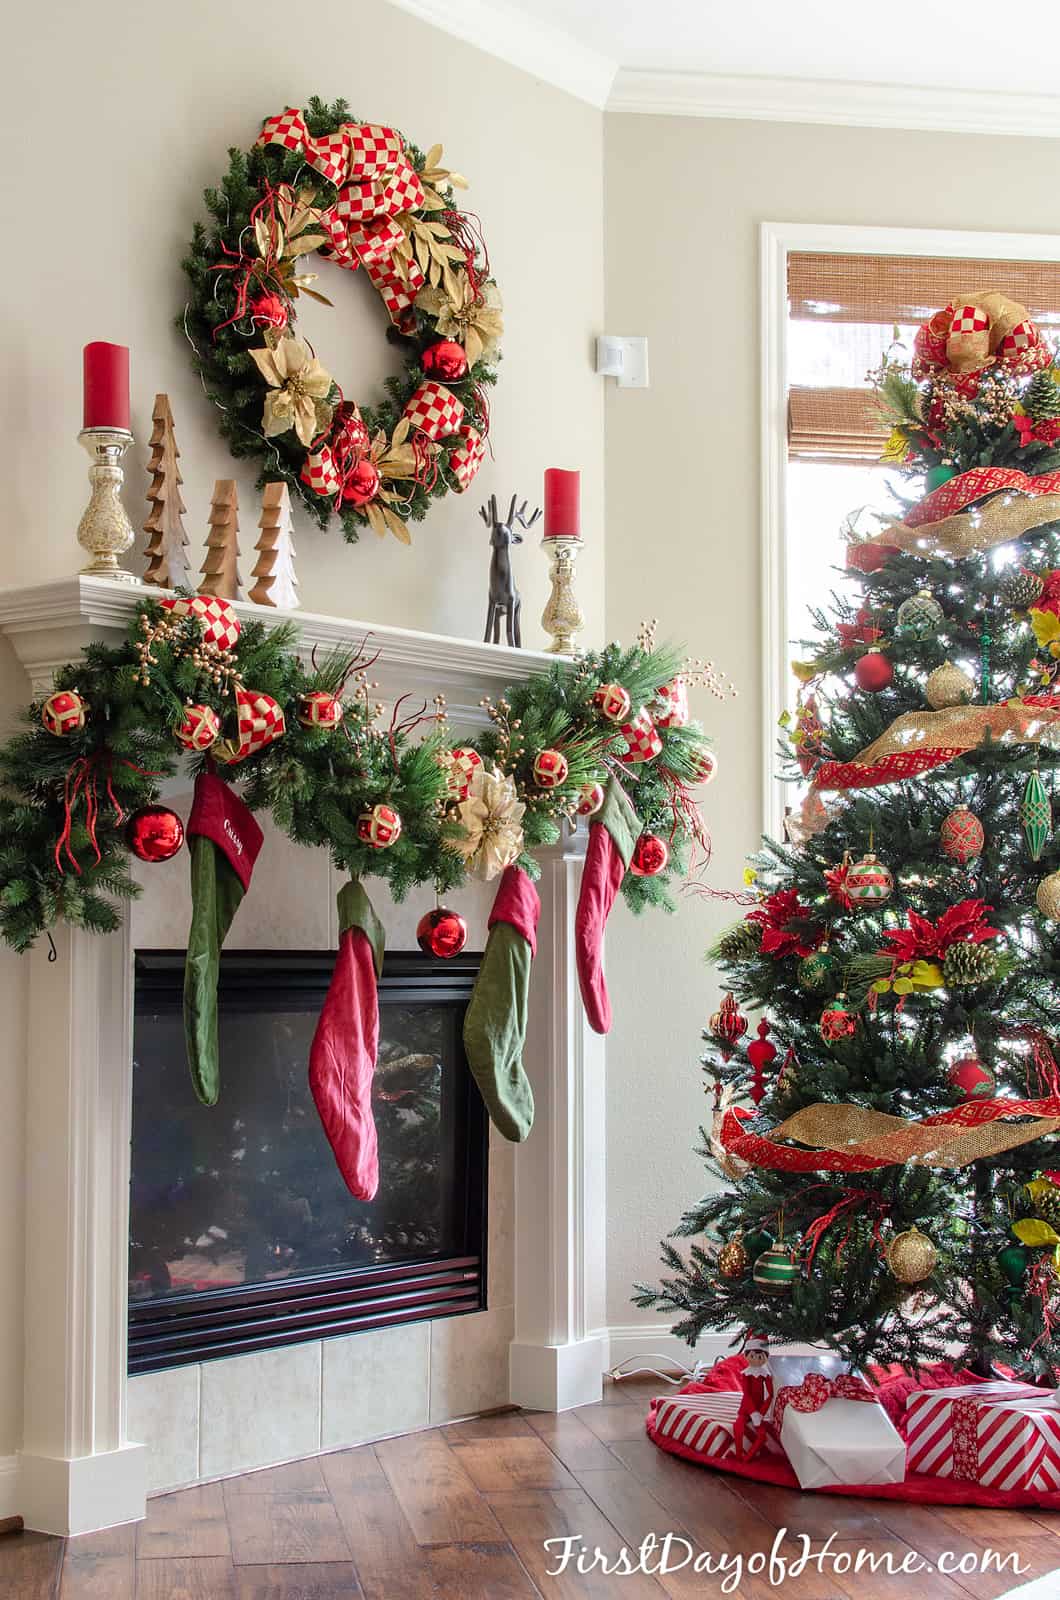 Christmas wreath and mantel by Christmas tree, decorated with red and gold.